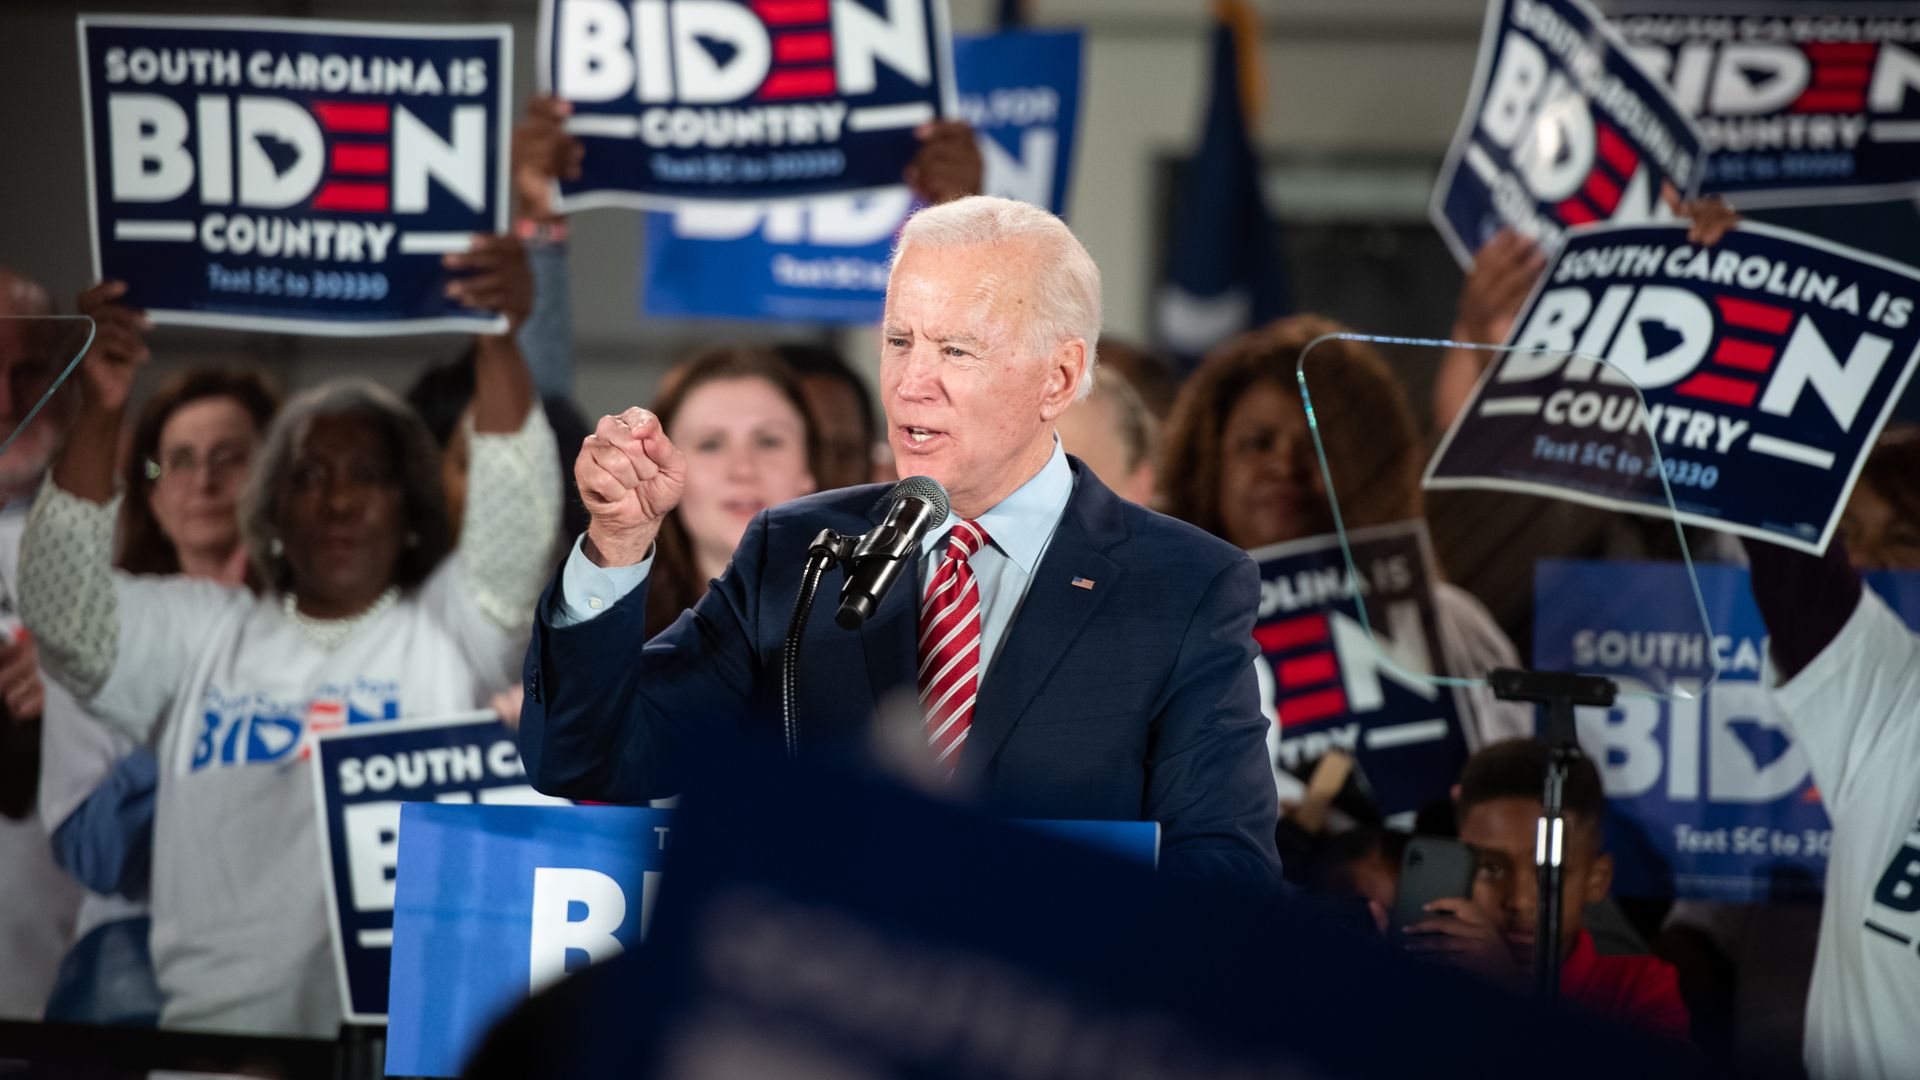 Democratic presidential candidate former Vice President Joe Biden addresses the crowd during a South Carolina campaign launch party on February 11